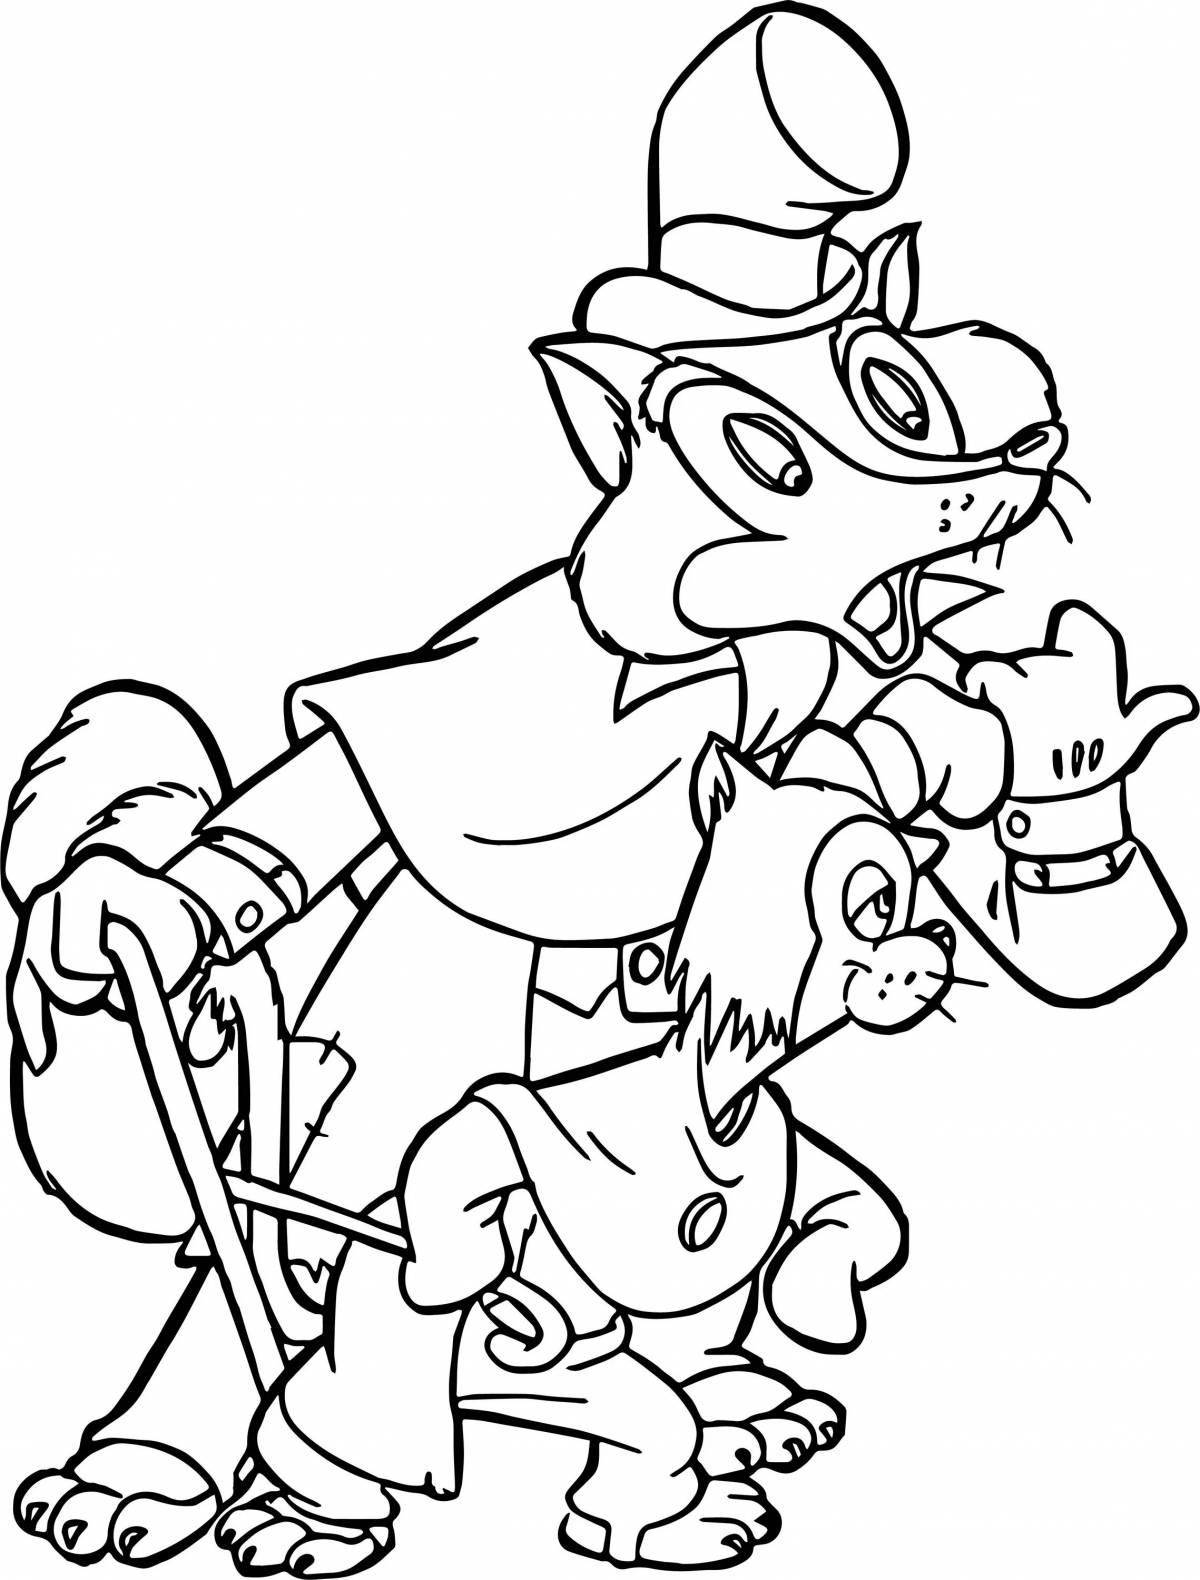 Fancy coloring pinocchio for kids